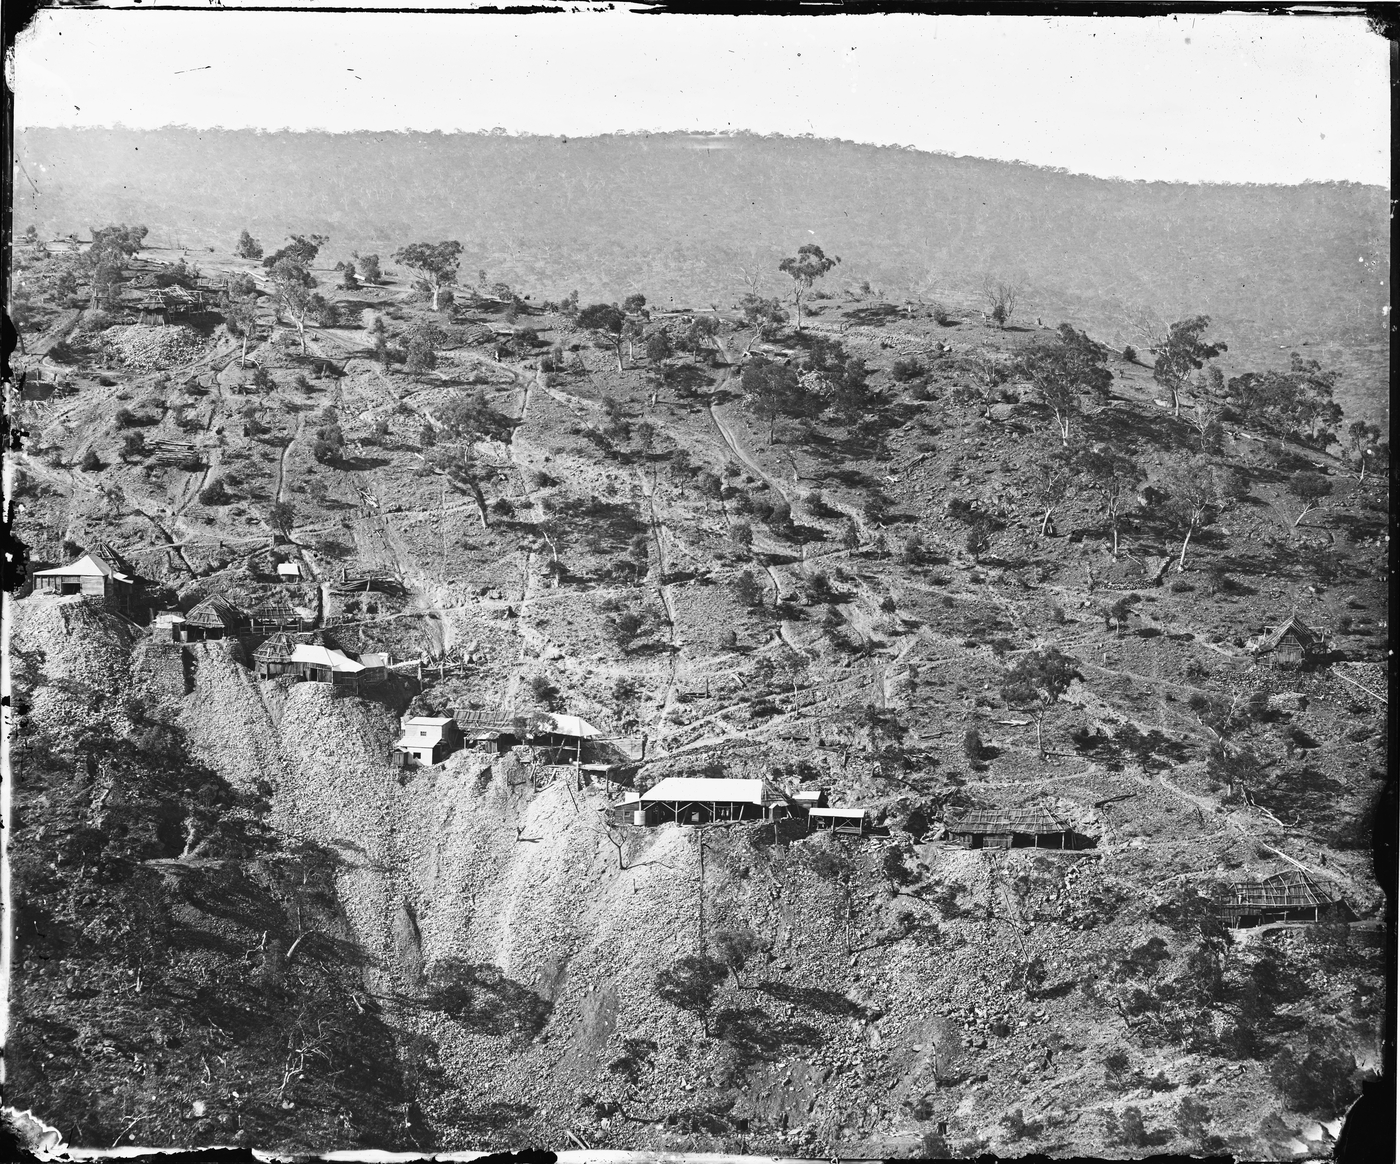 Panorama of Central Hawkins Hill (showing Holtermann goldmine), Hill End